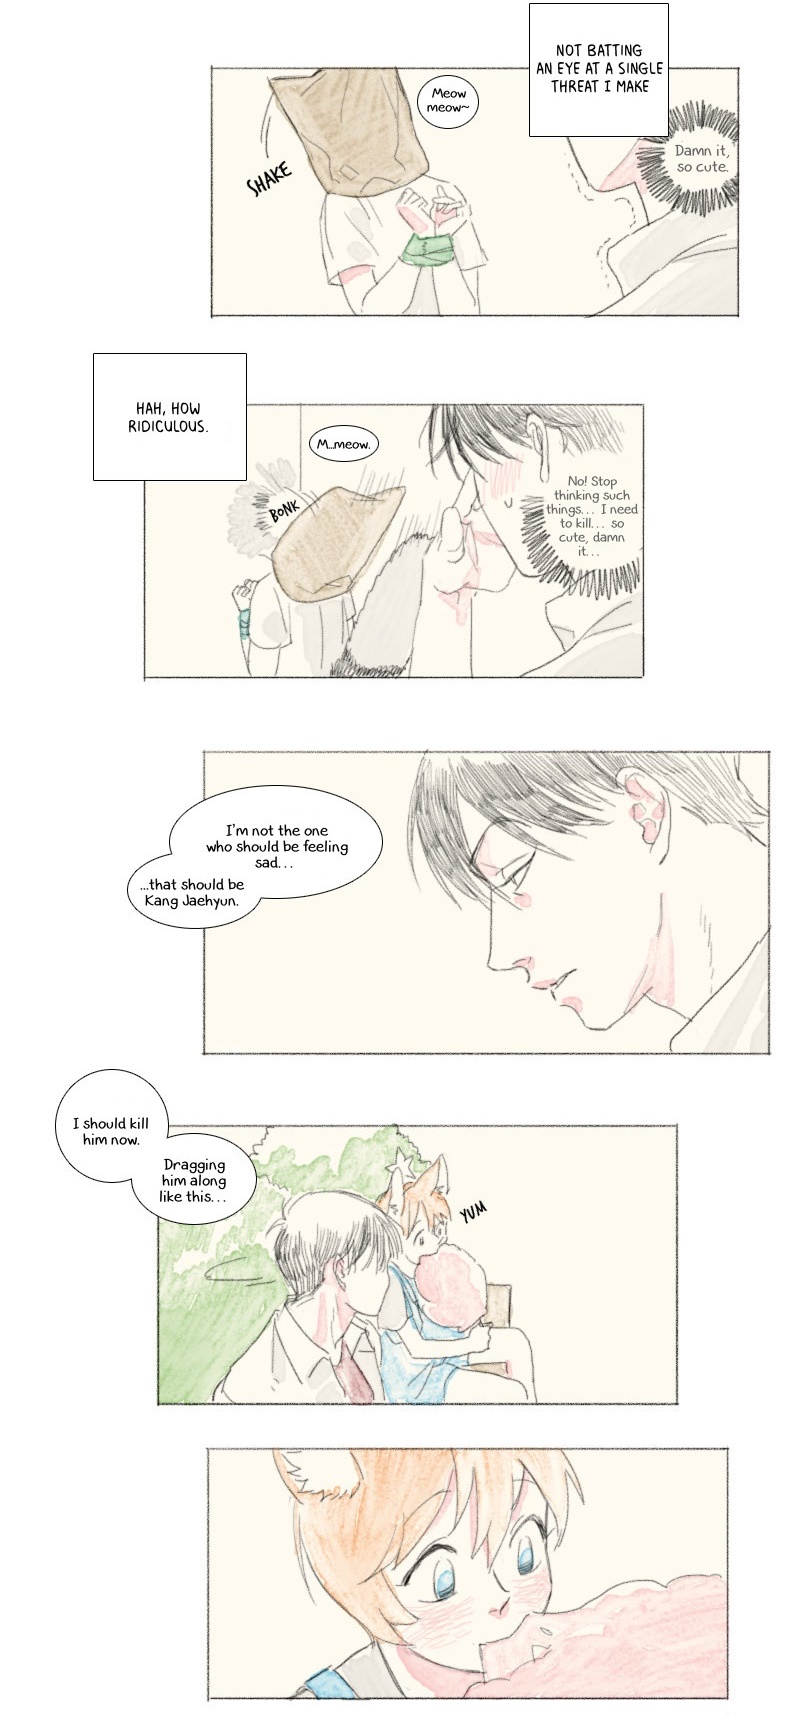 Catboy Catday Ch. 33 What